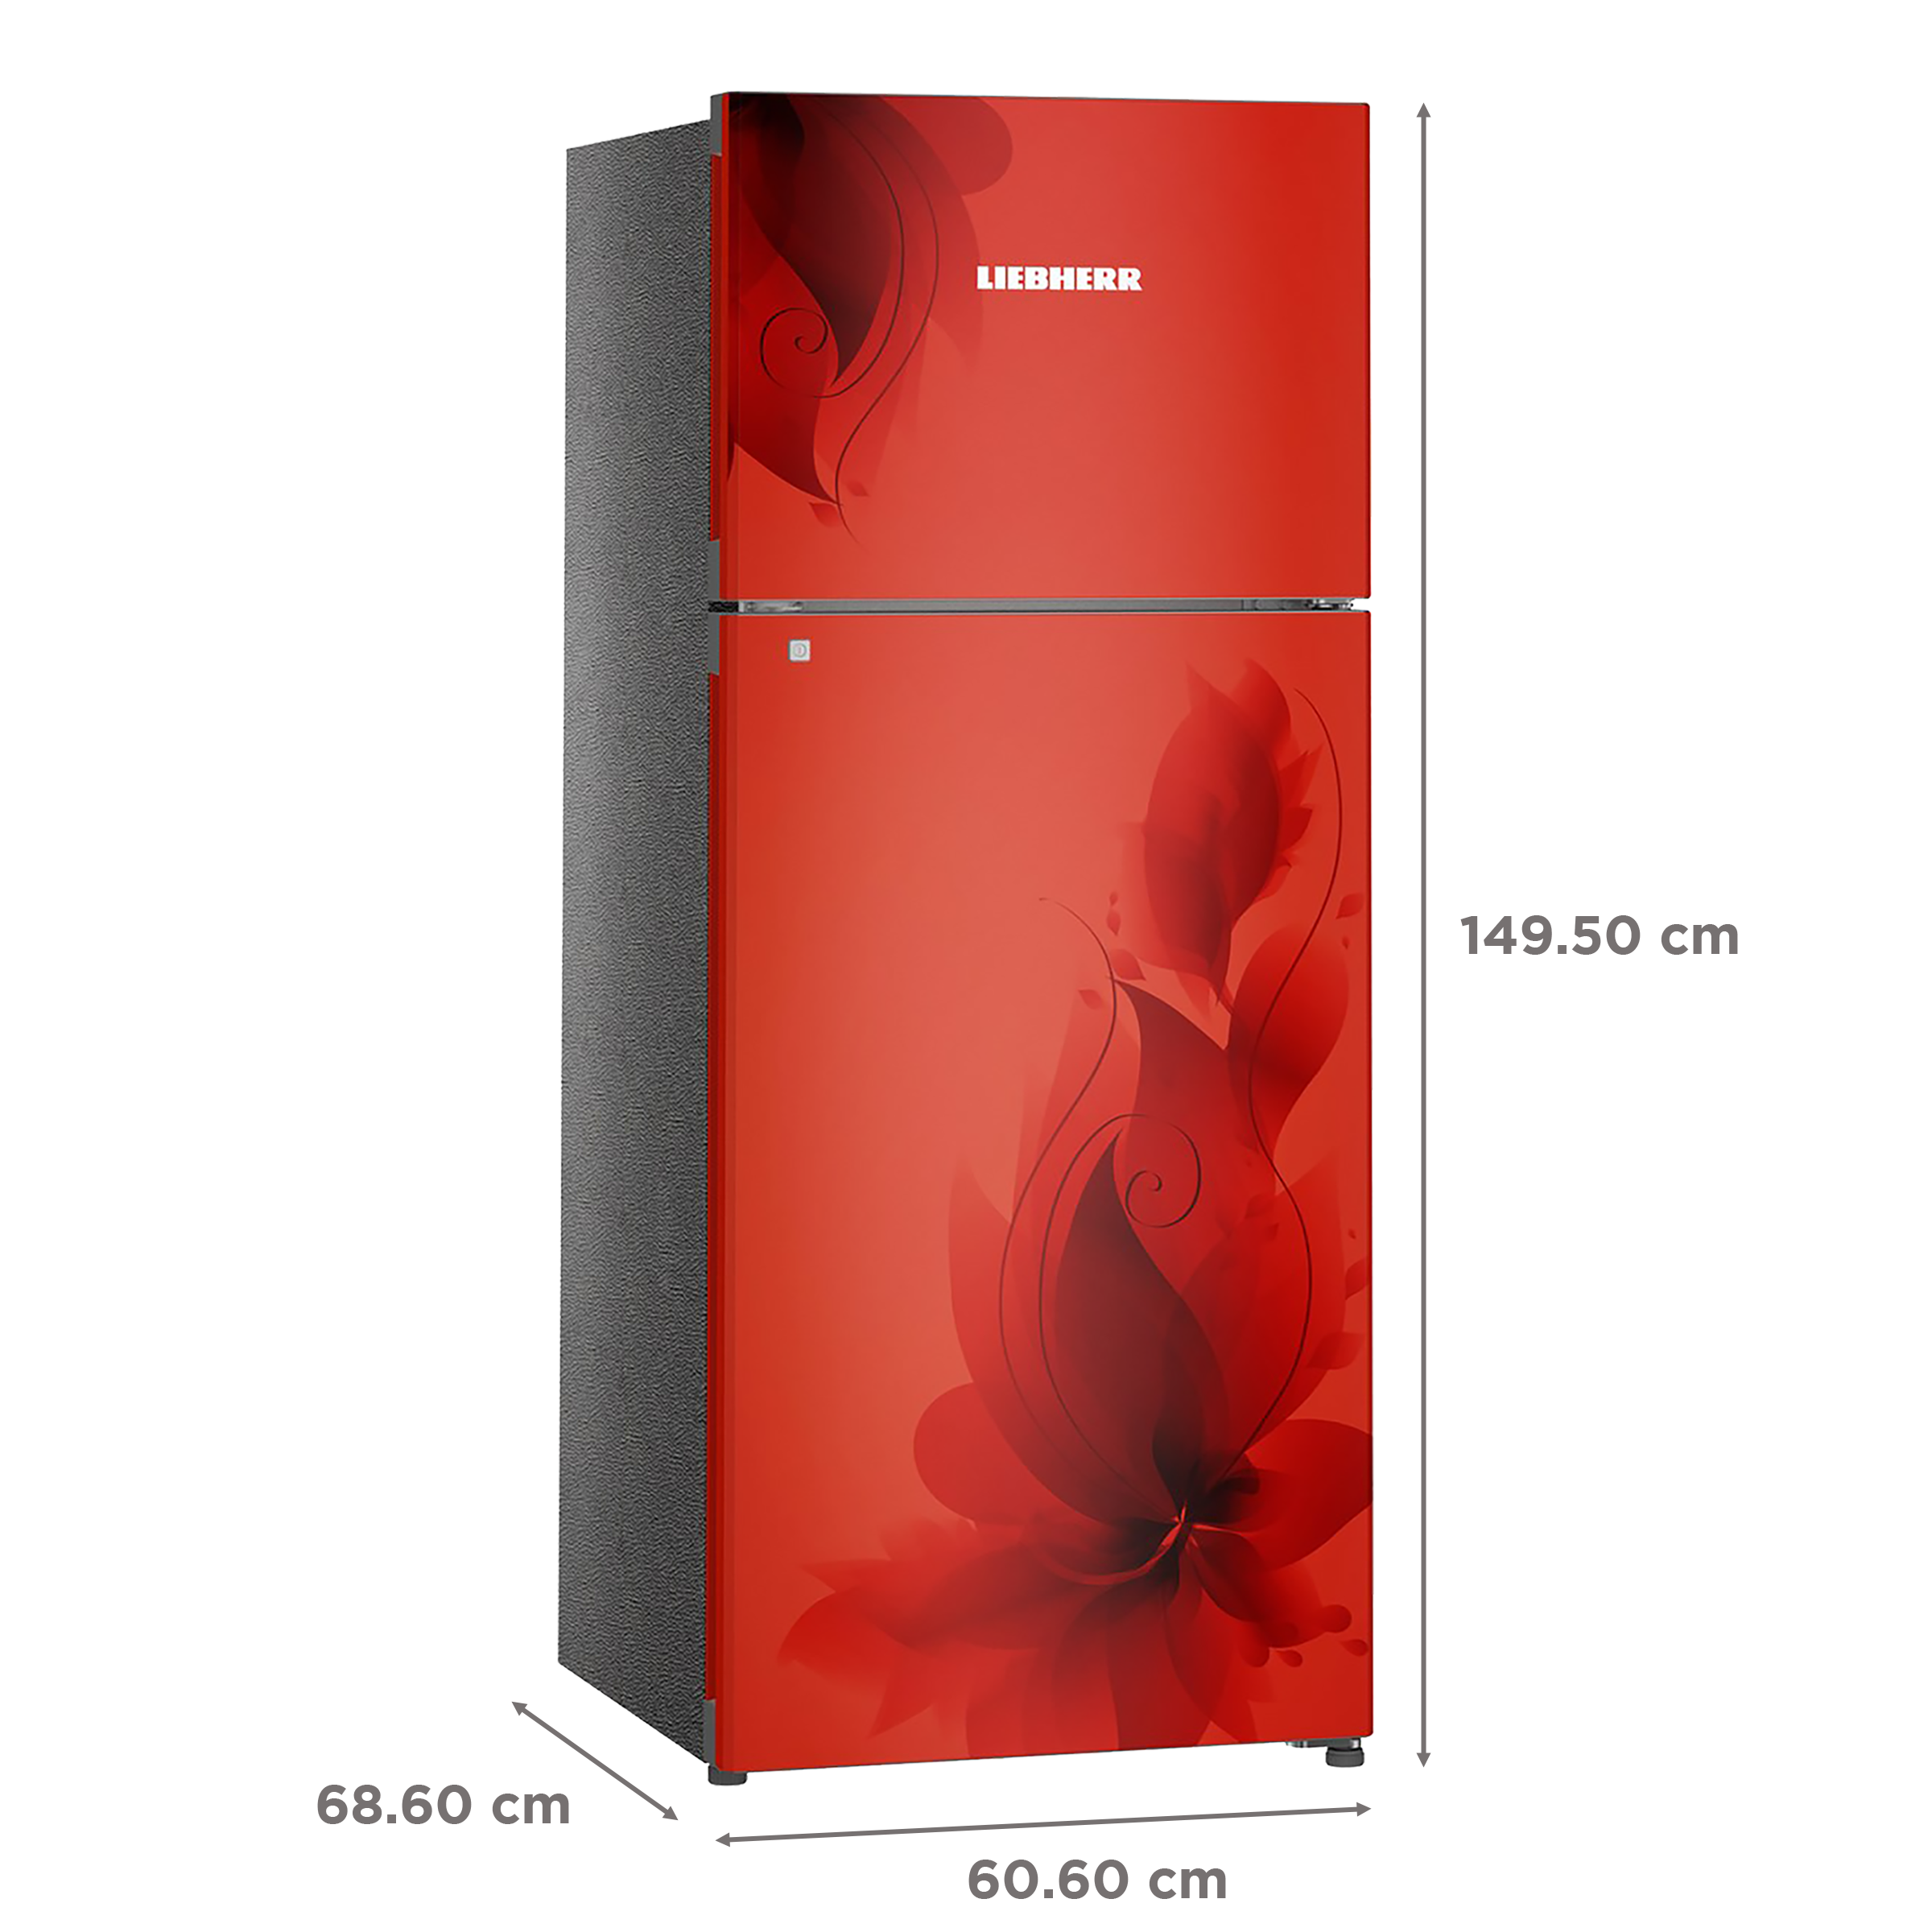 Liebherr 265 Litres 2 Star Frost Free Double Door Refrigerator with Multi Air Flow System (TCRF 2610, Red Floral)_3